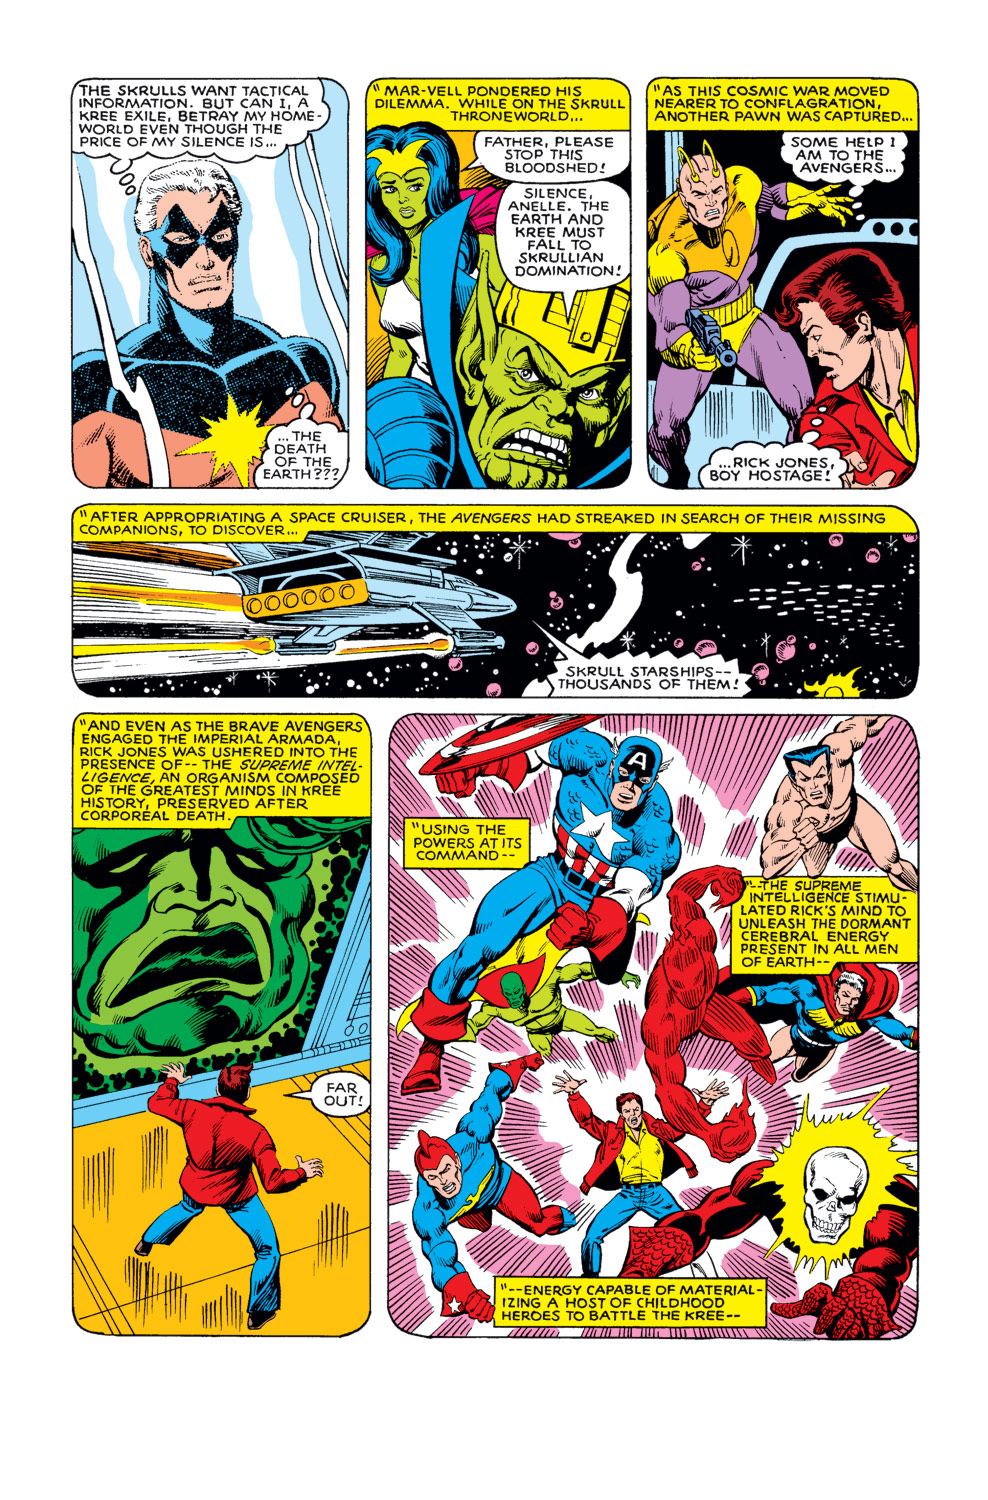 What If? (1977) issue 20 - The Avengers fought the Kree-Skrull war without Rick Jones - Page 4